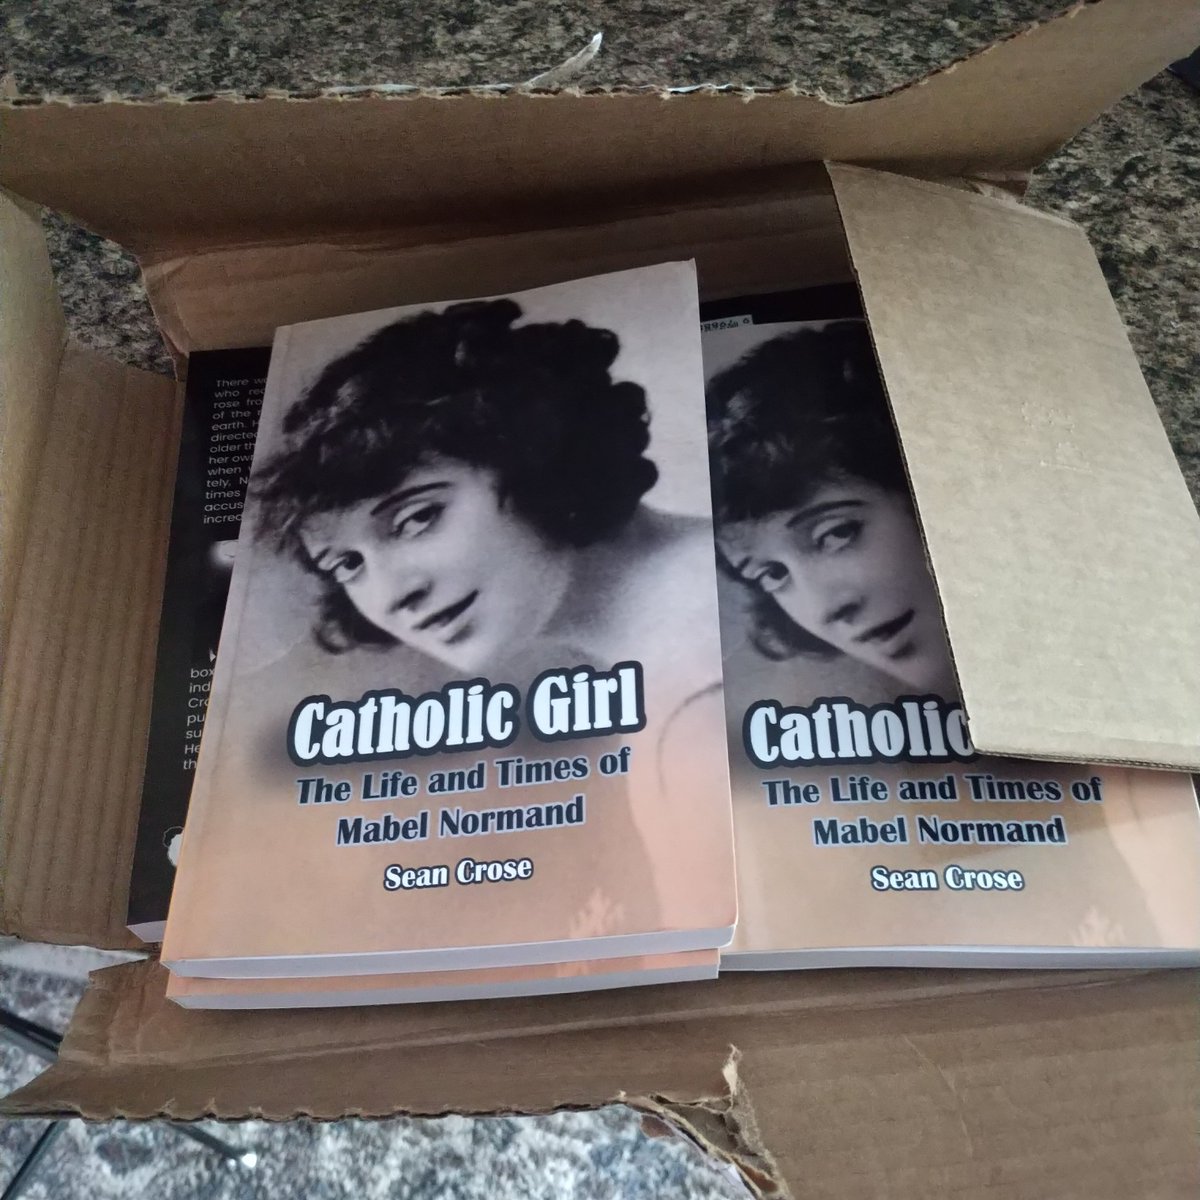 Author copies of 'Catholic Girl' have arrived. 

#MabelNormand